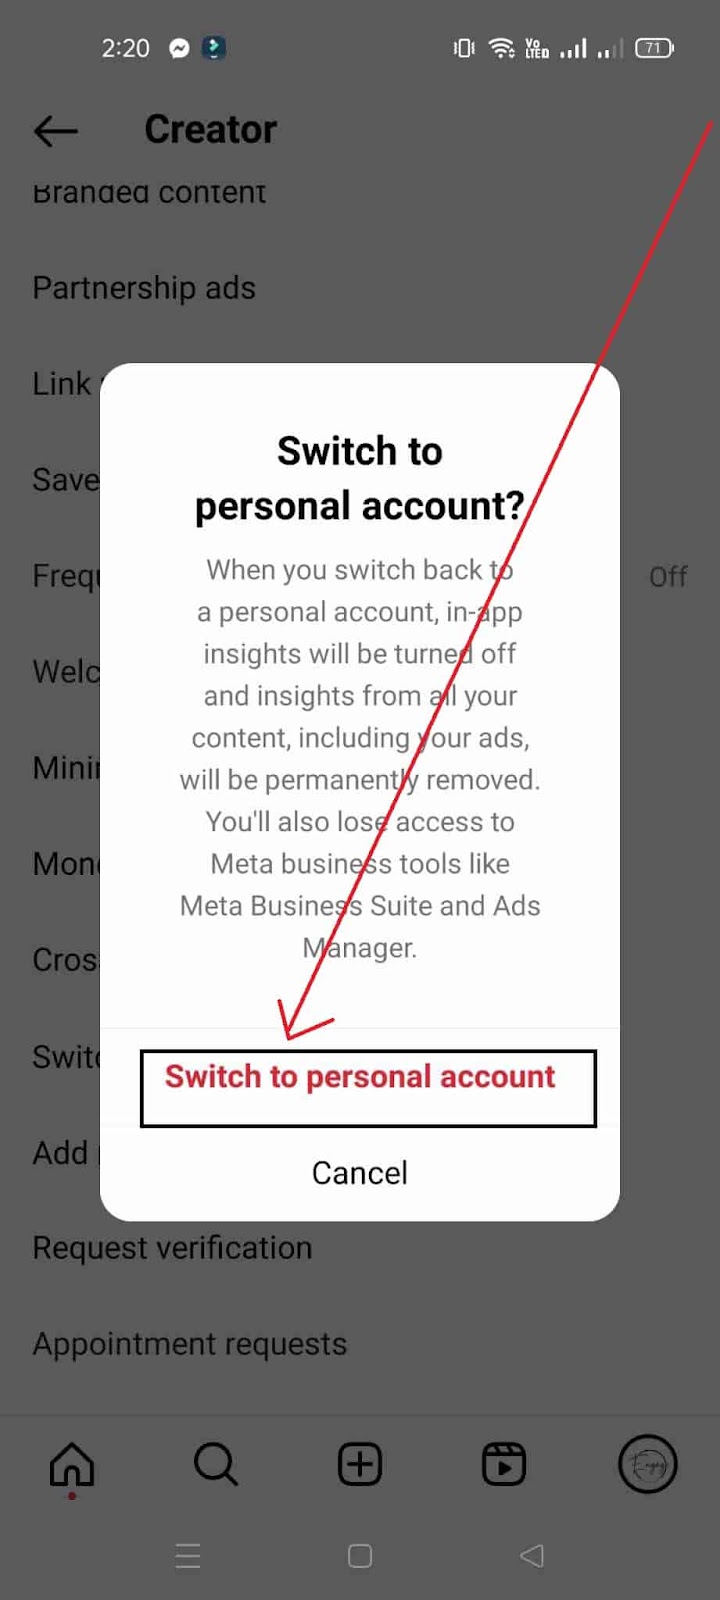 How to Turn off an Instagram Business Account - Confirm Switching